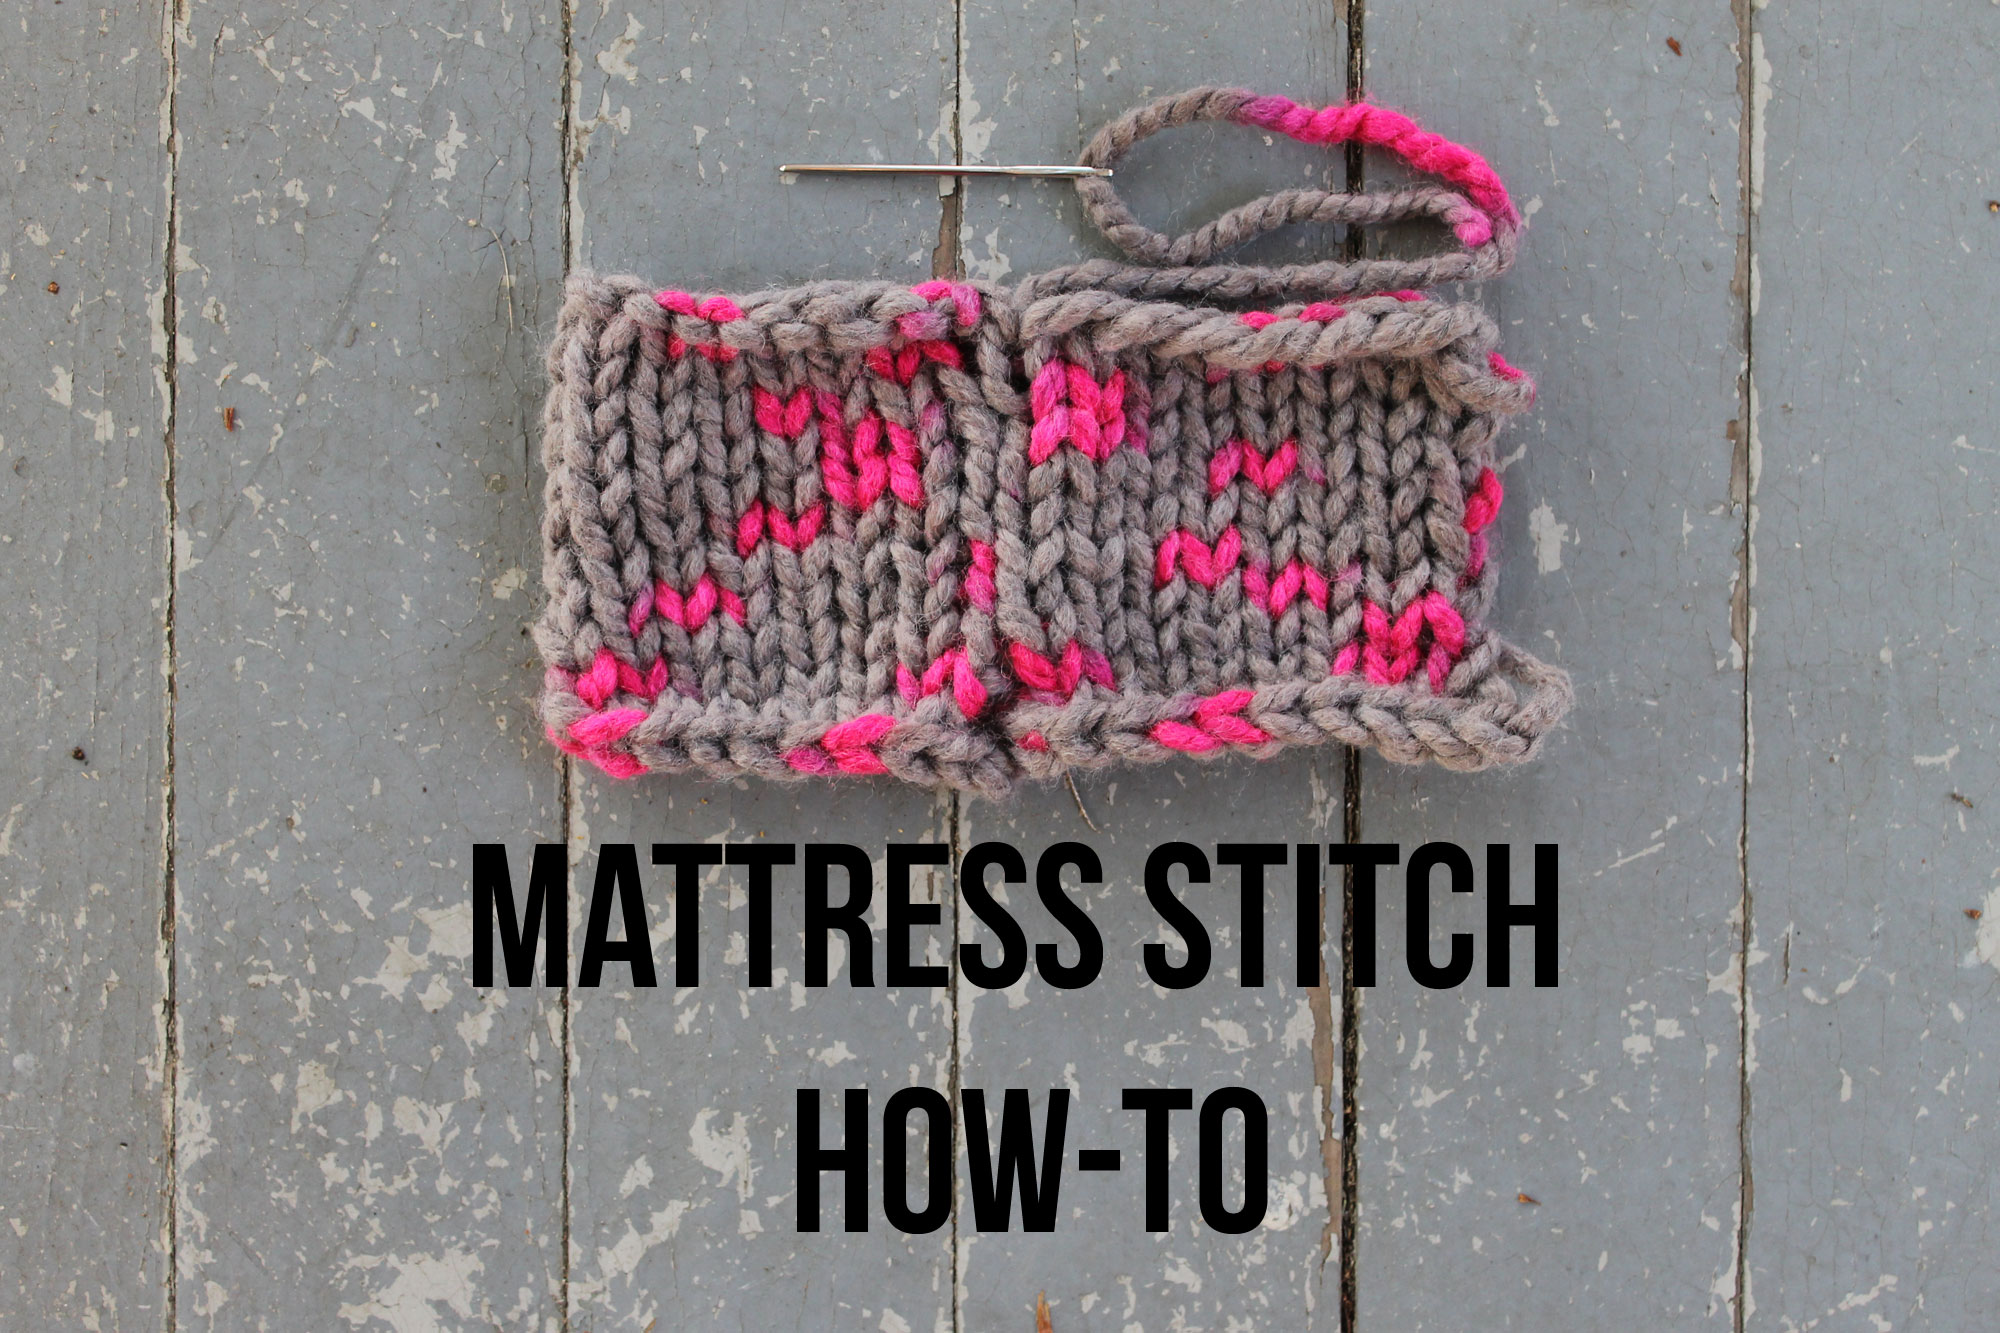 Learn how to seam your knits with mattress stitch